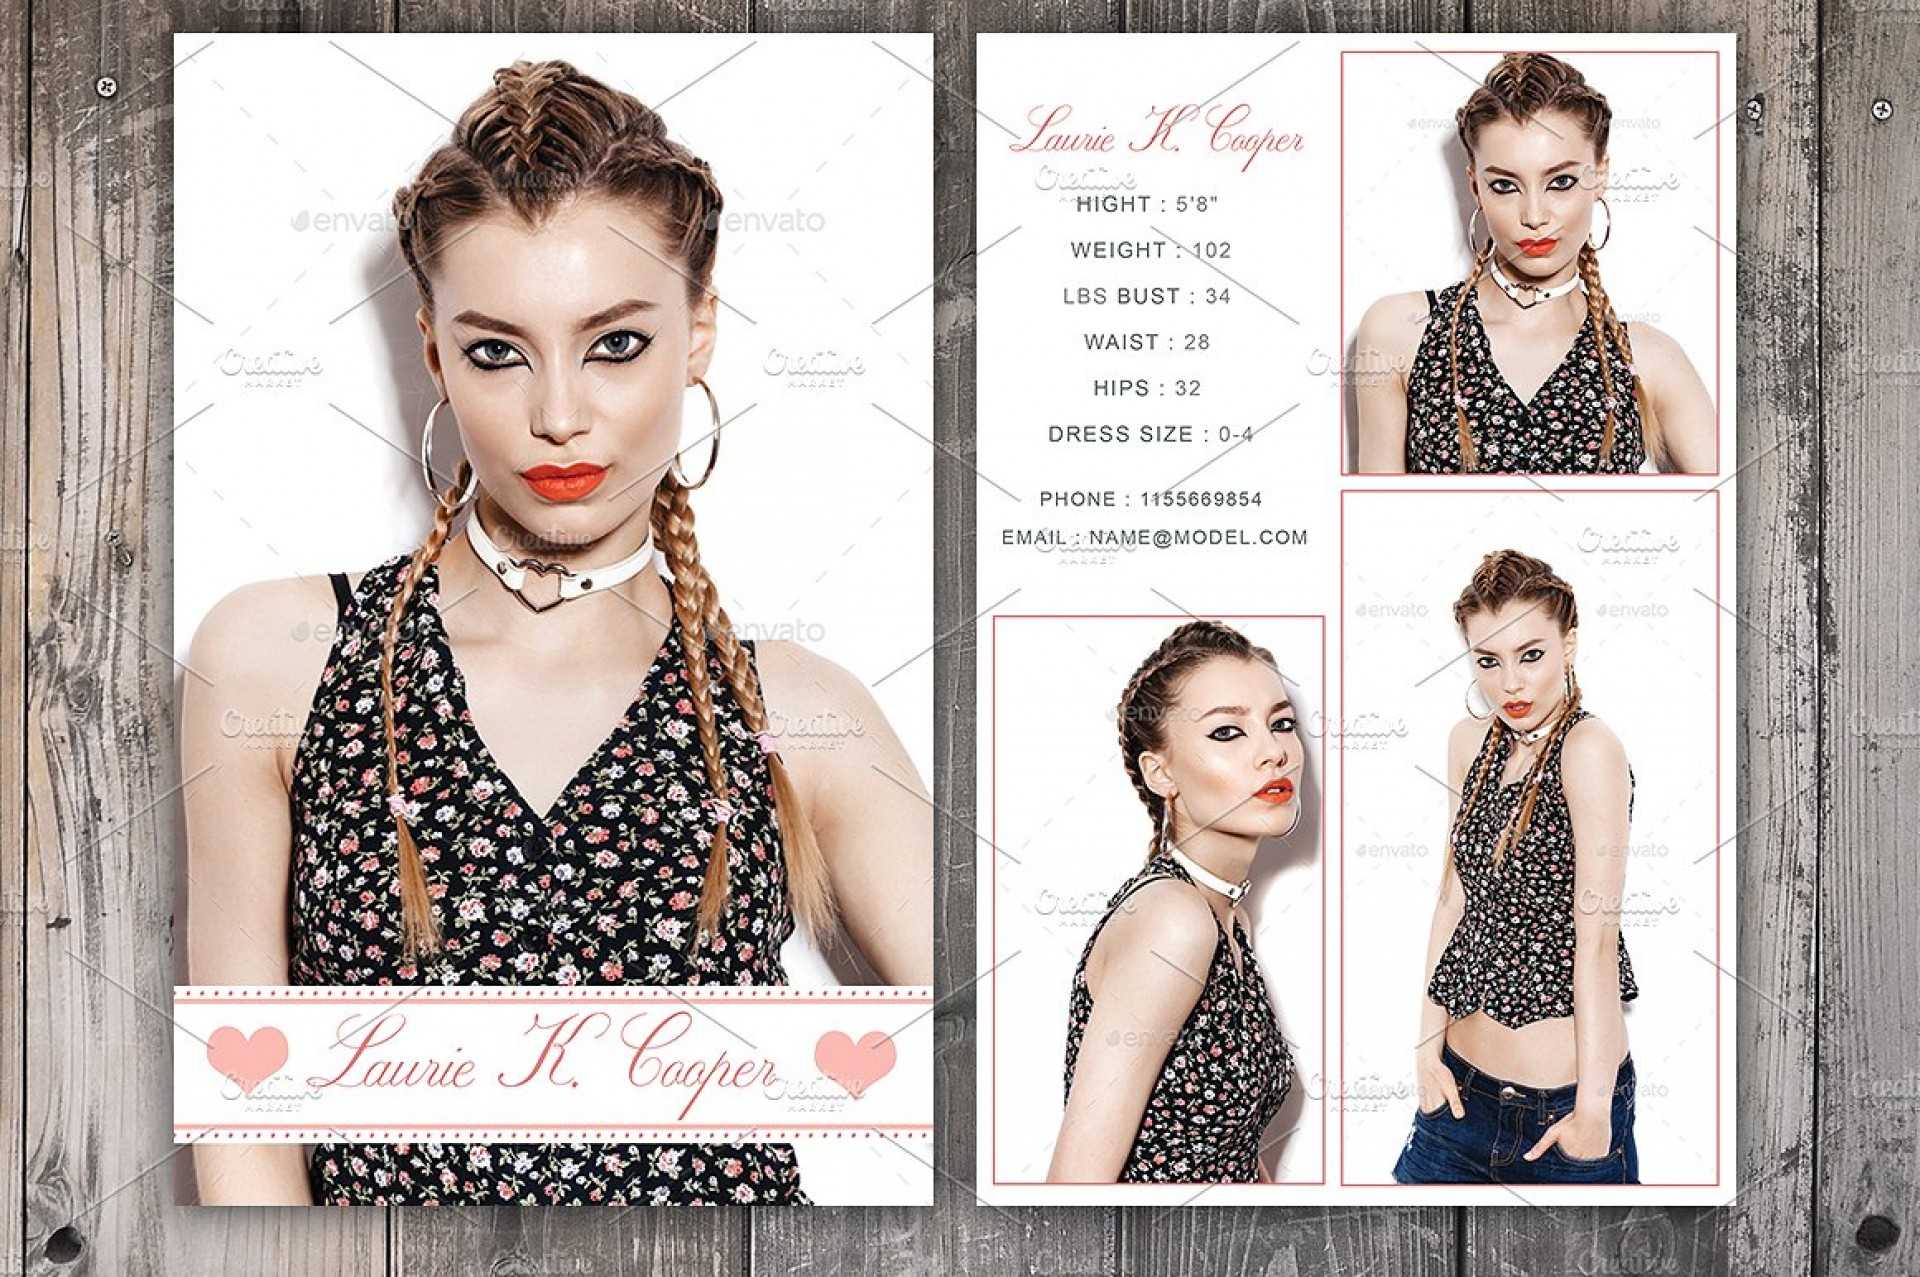 Free Model Comp Card Templates - C Punkt For Free Model Comp Card Template Psd